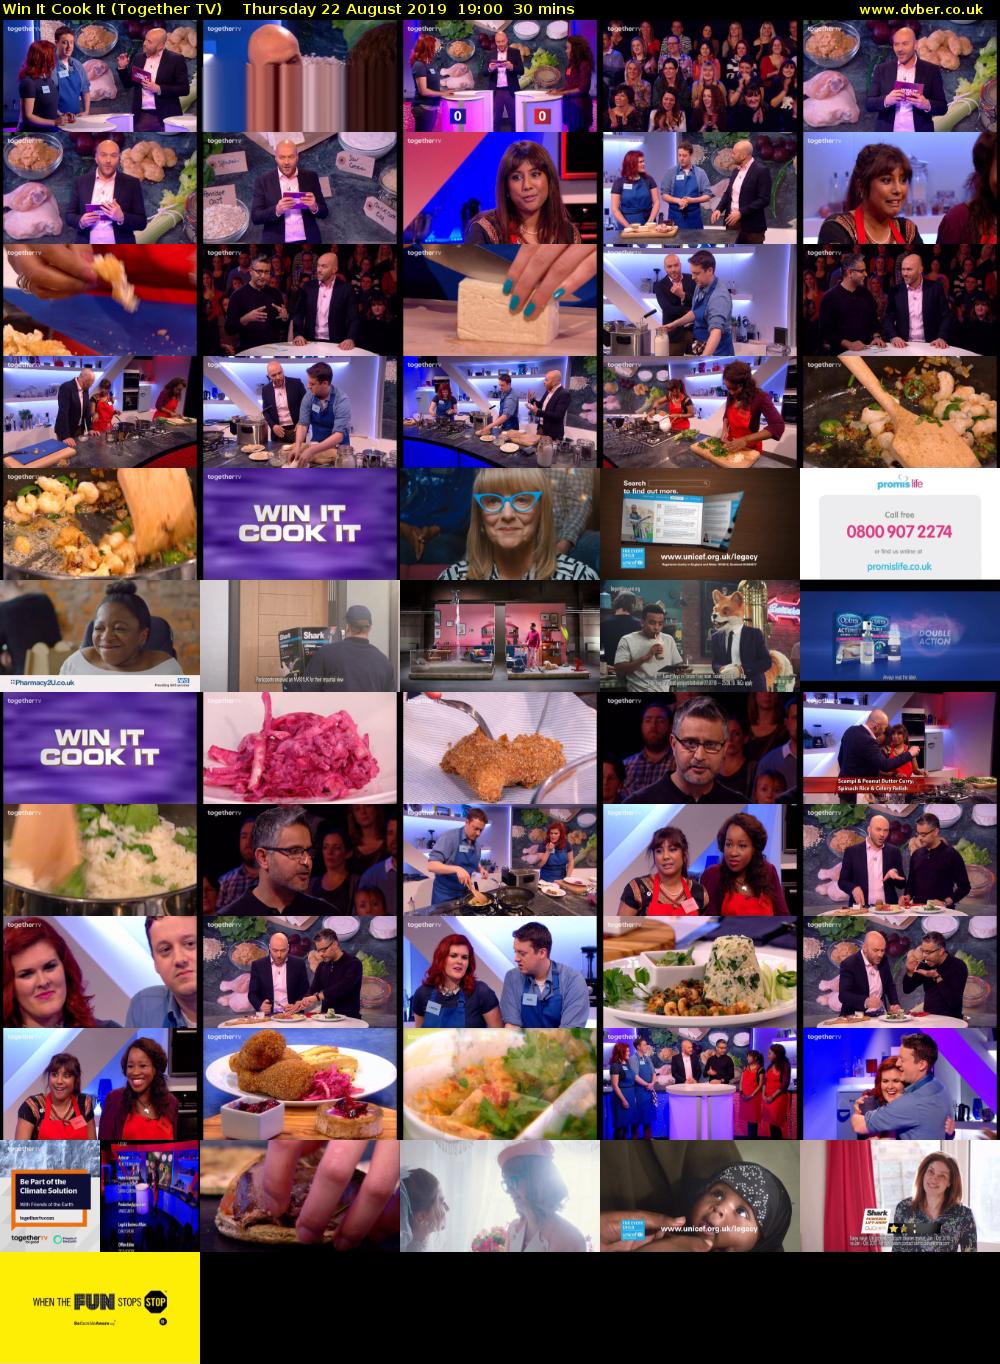 Win It Cook It (Together TV) Thursday 22 August 2019 19:00 - 19:30